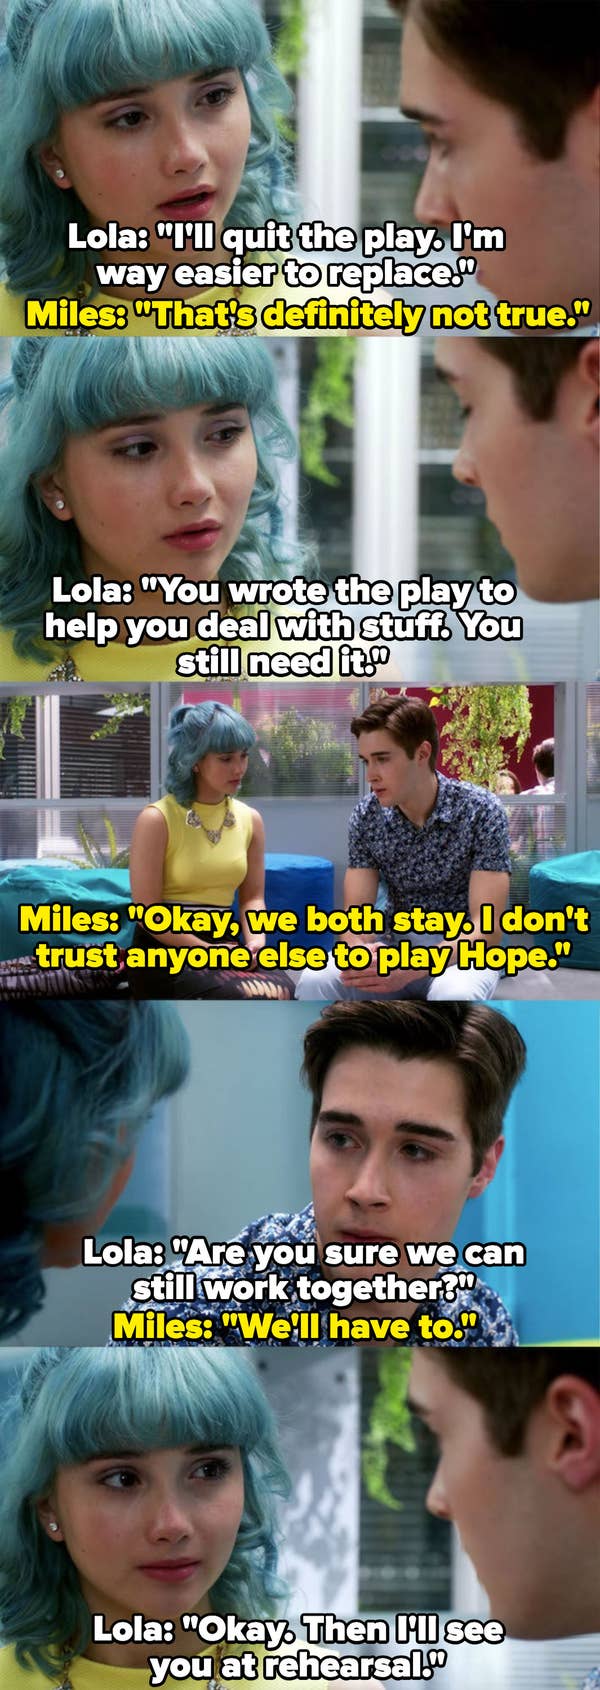 Lola persuades Miles not to quit the play because he still needs it, he says he doesn't trust anyone to replace her role, they agree to still work together